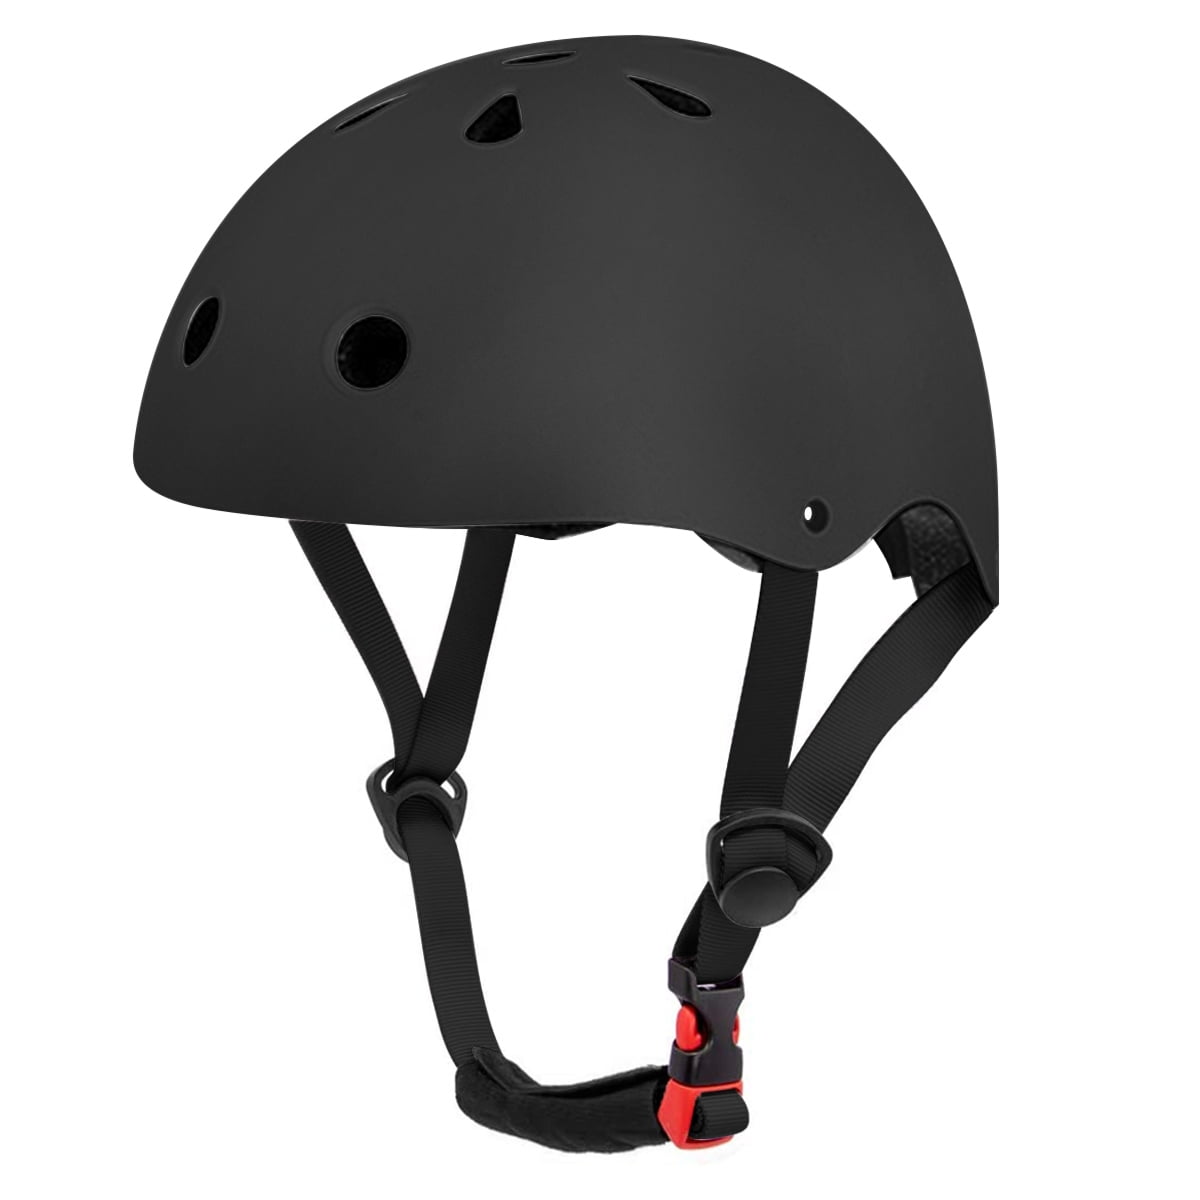 helmet for two year old